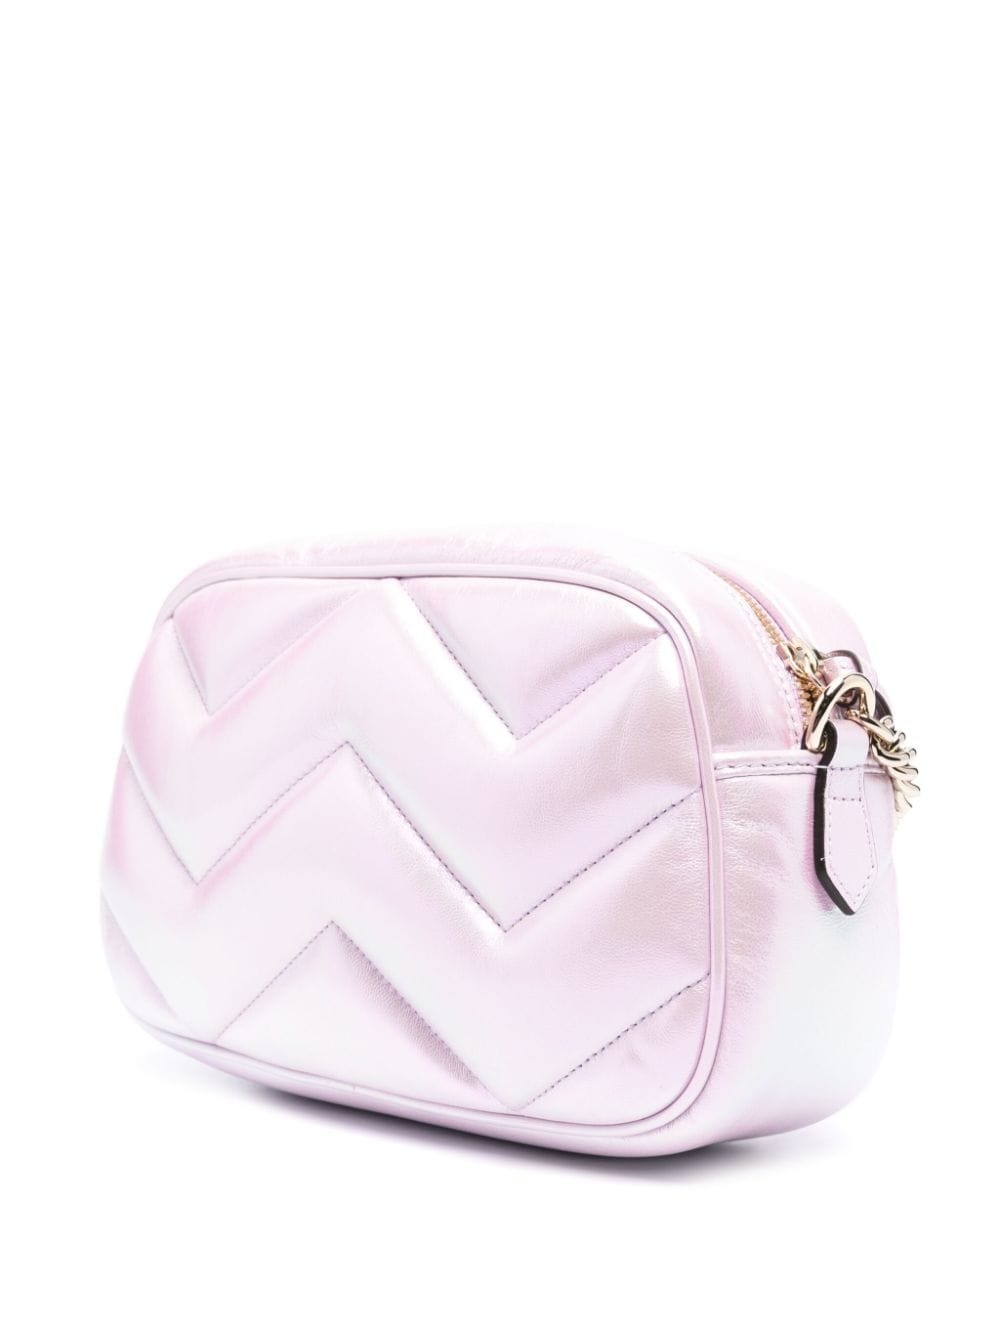 Gg marmont small leather shoulder bag - 3